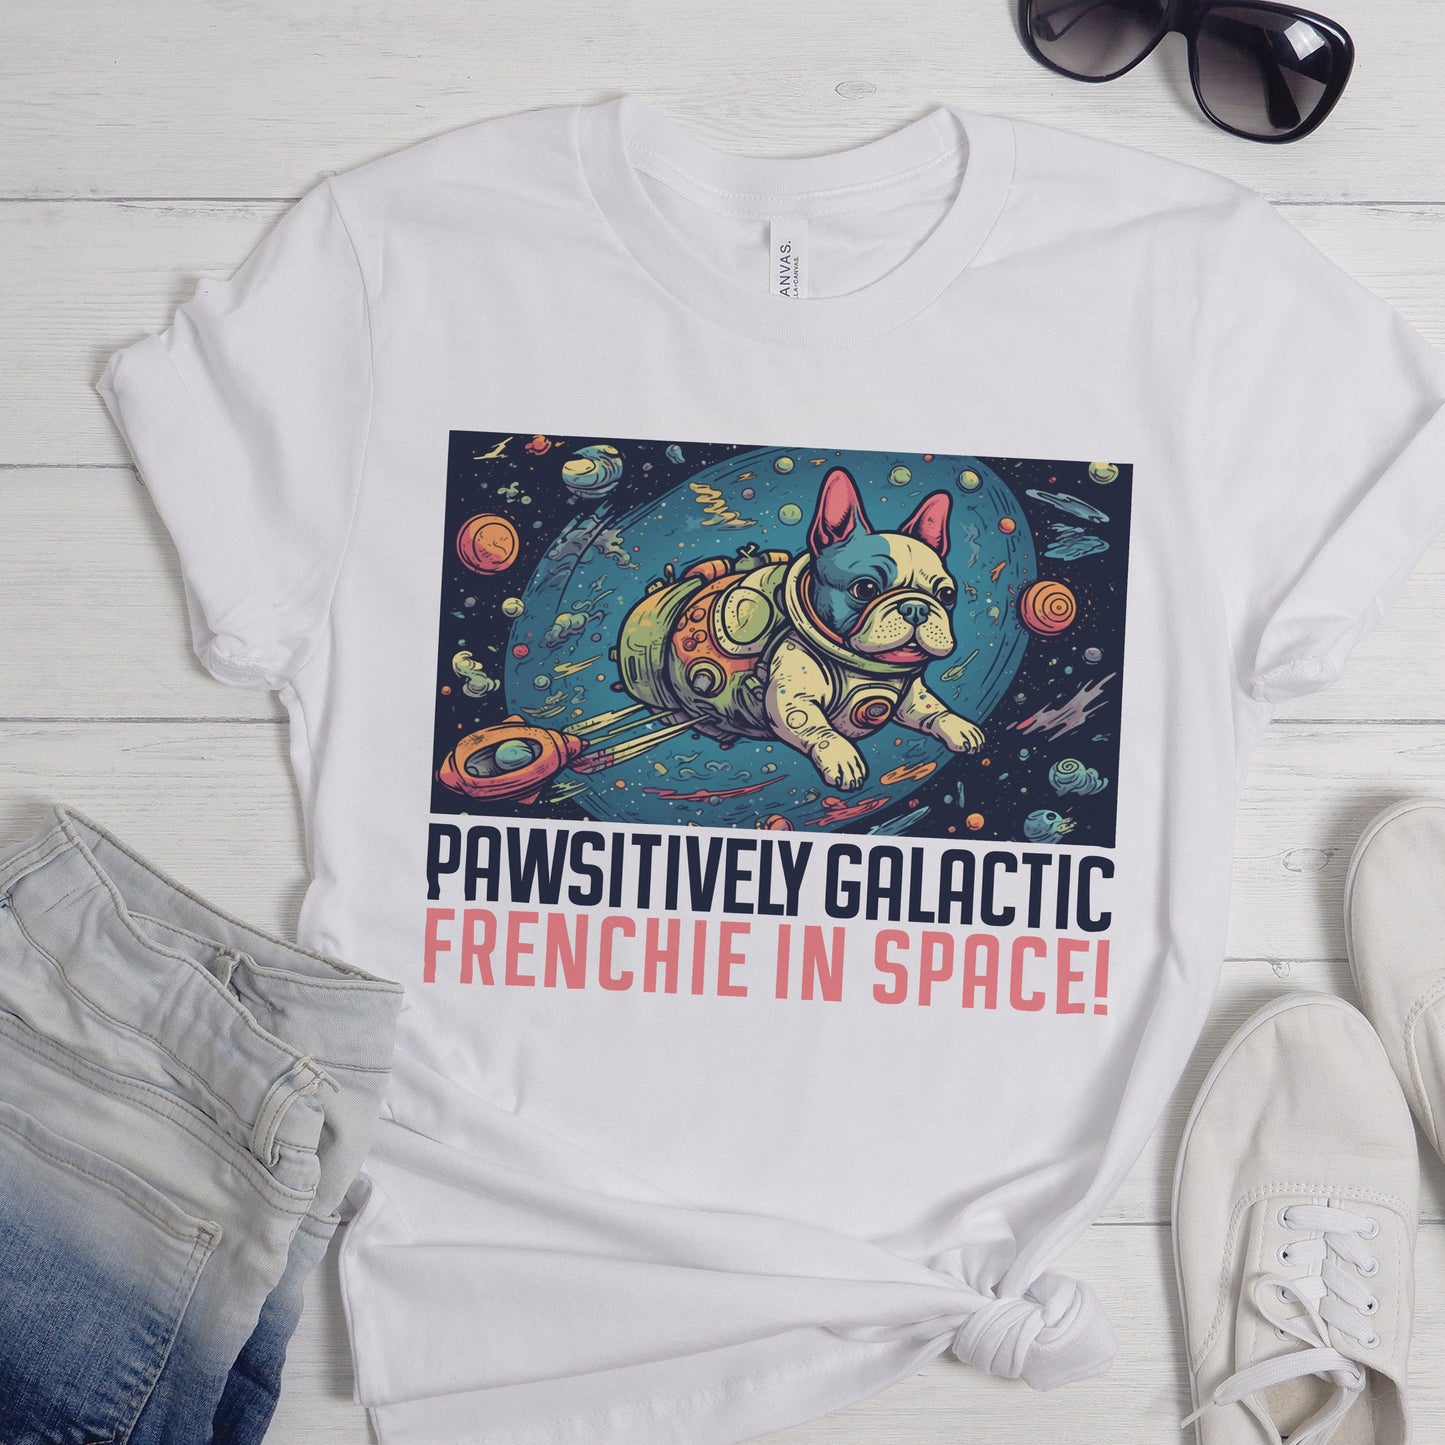 Frenchie in space -  Unisex T-Shirt